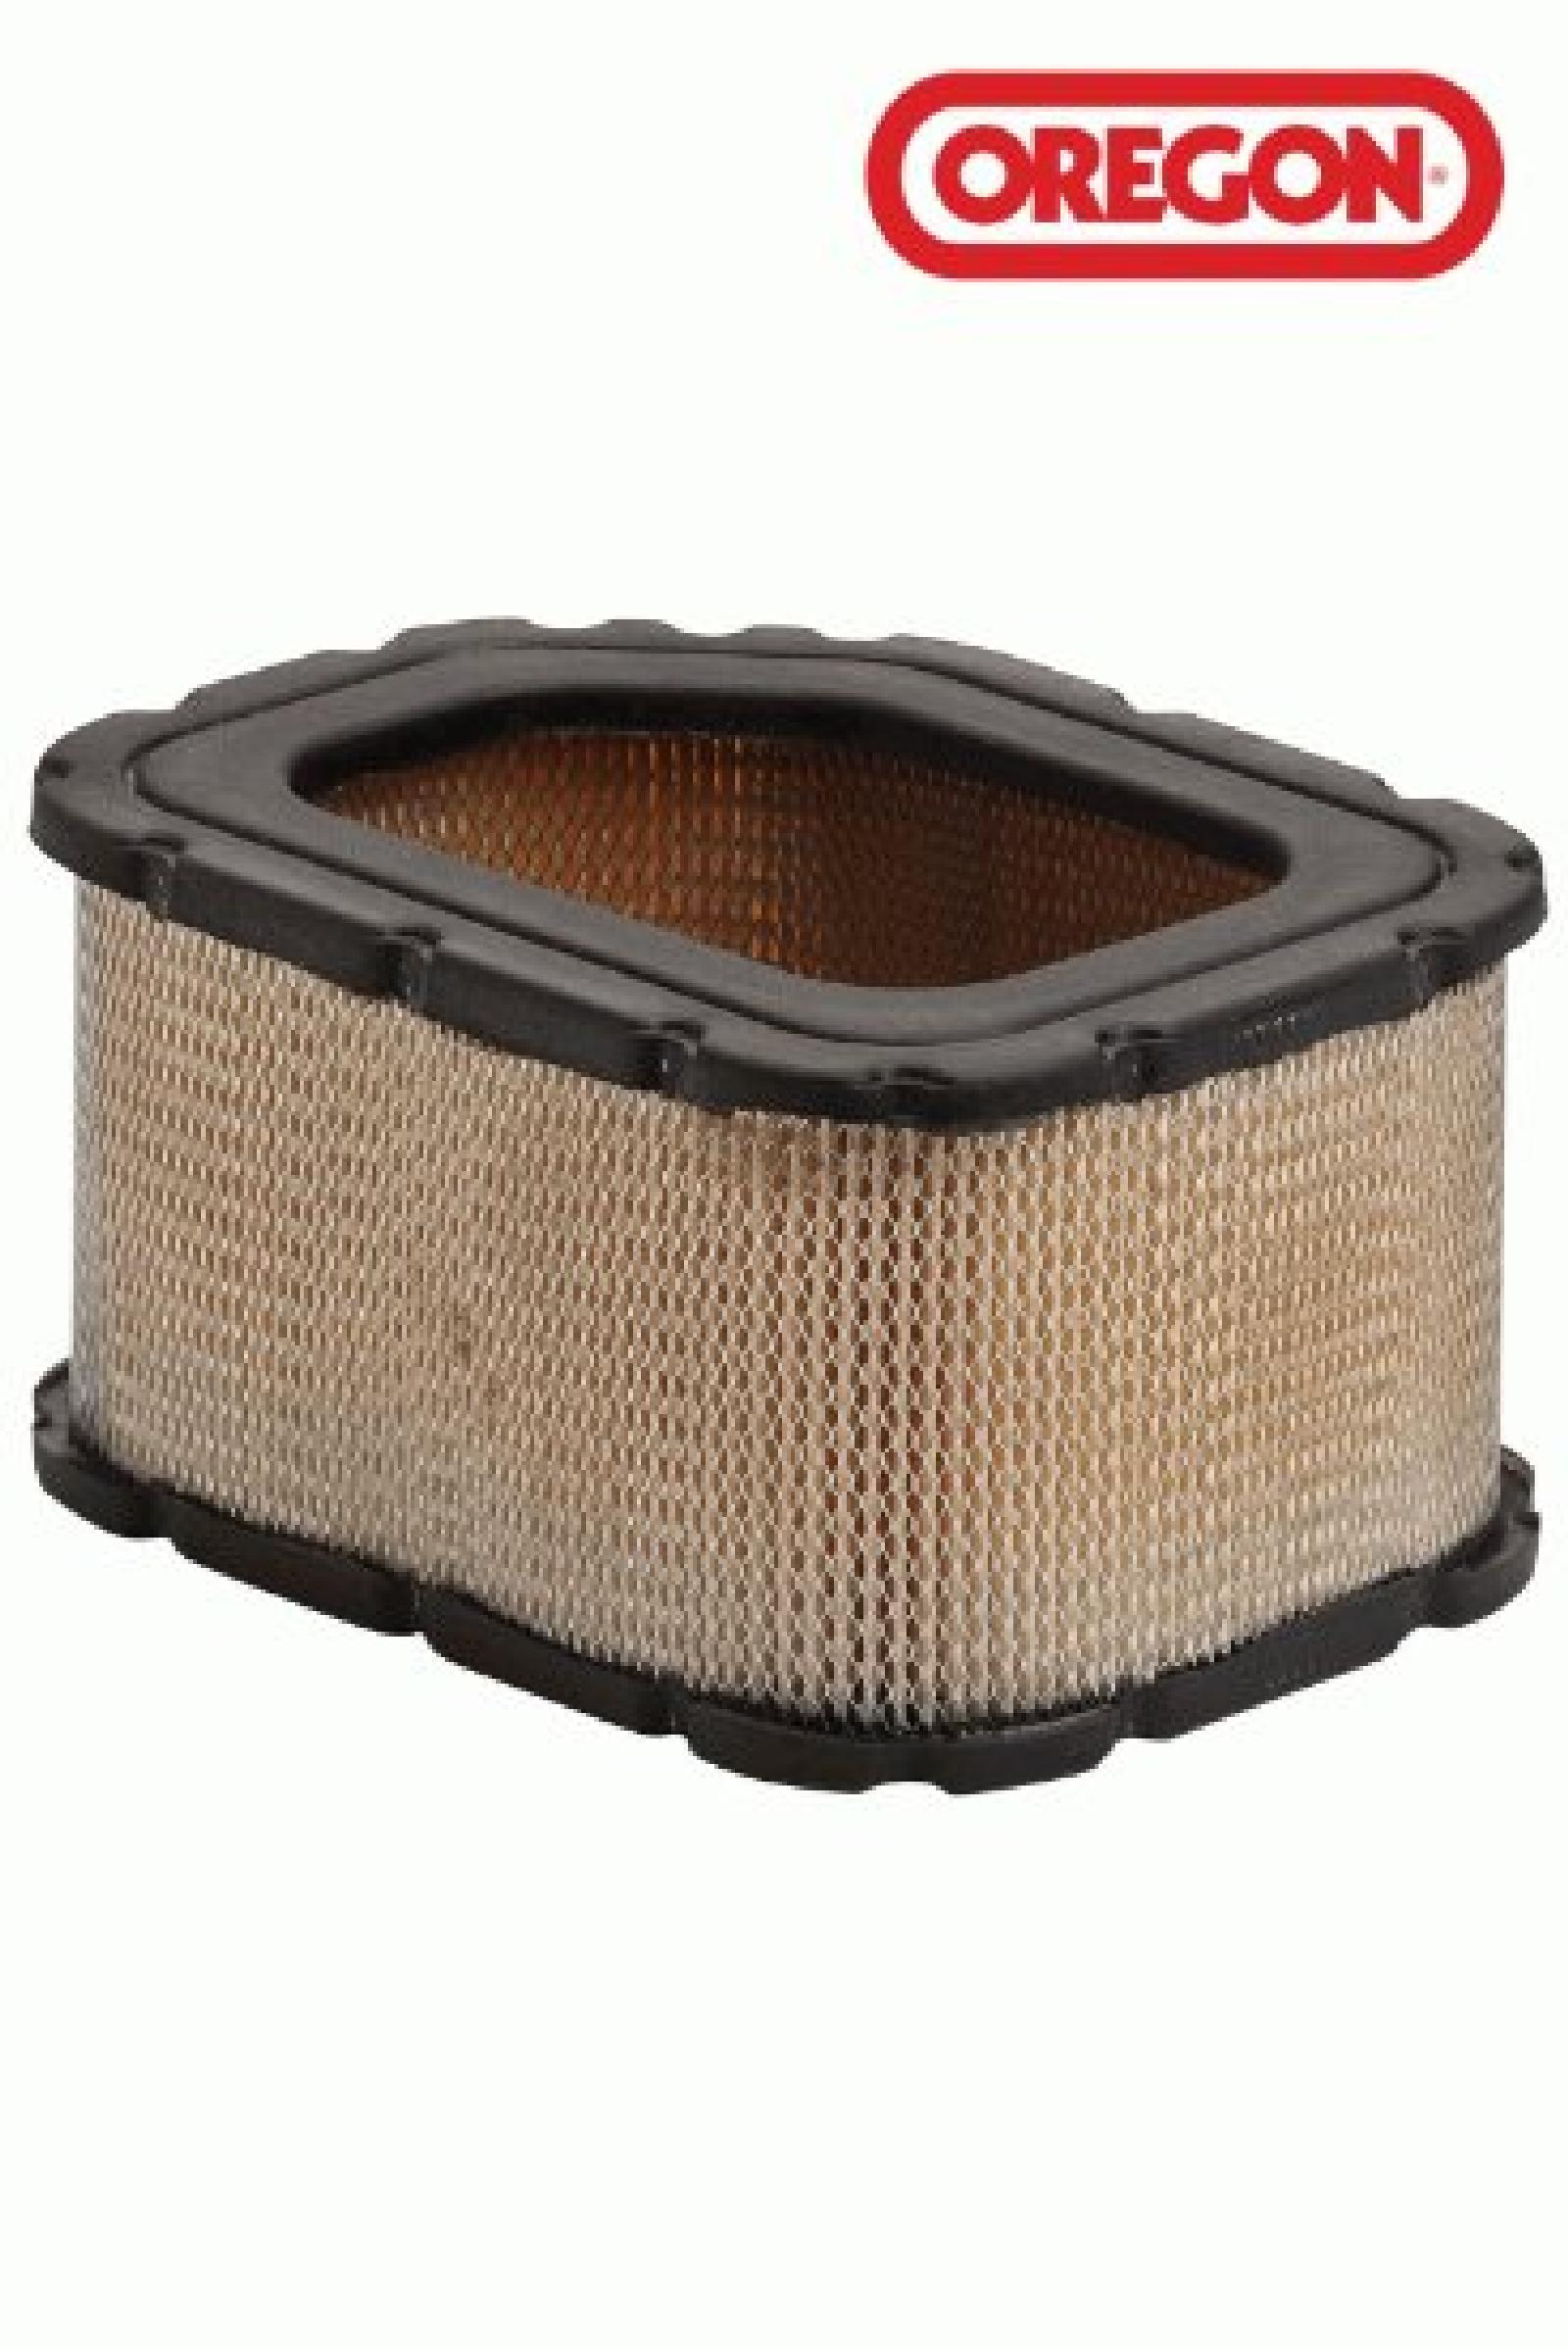 FILTER, AIR KOHLER 32 083 part# 30-159 by Oregon - Click Image to Close